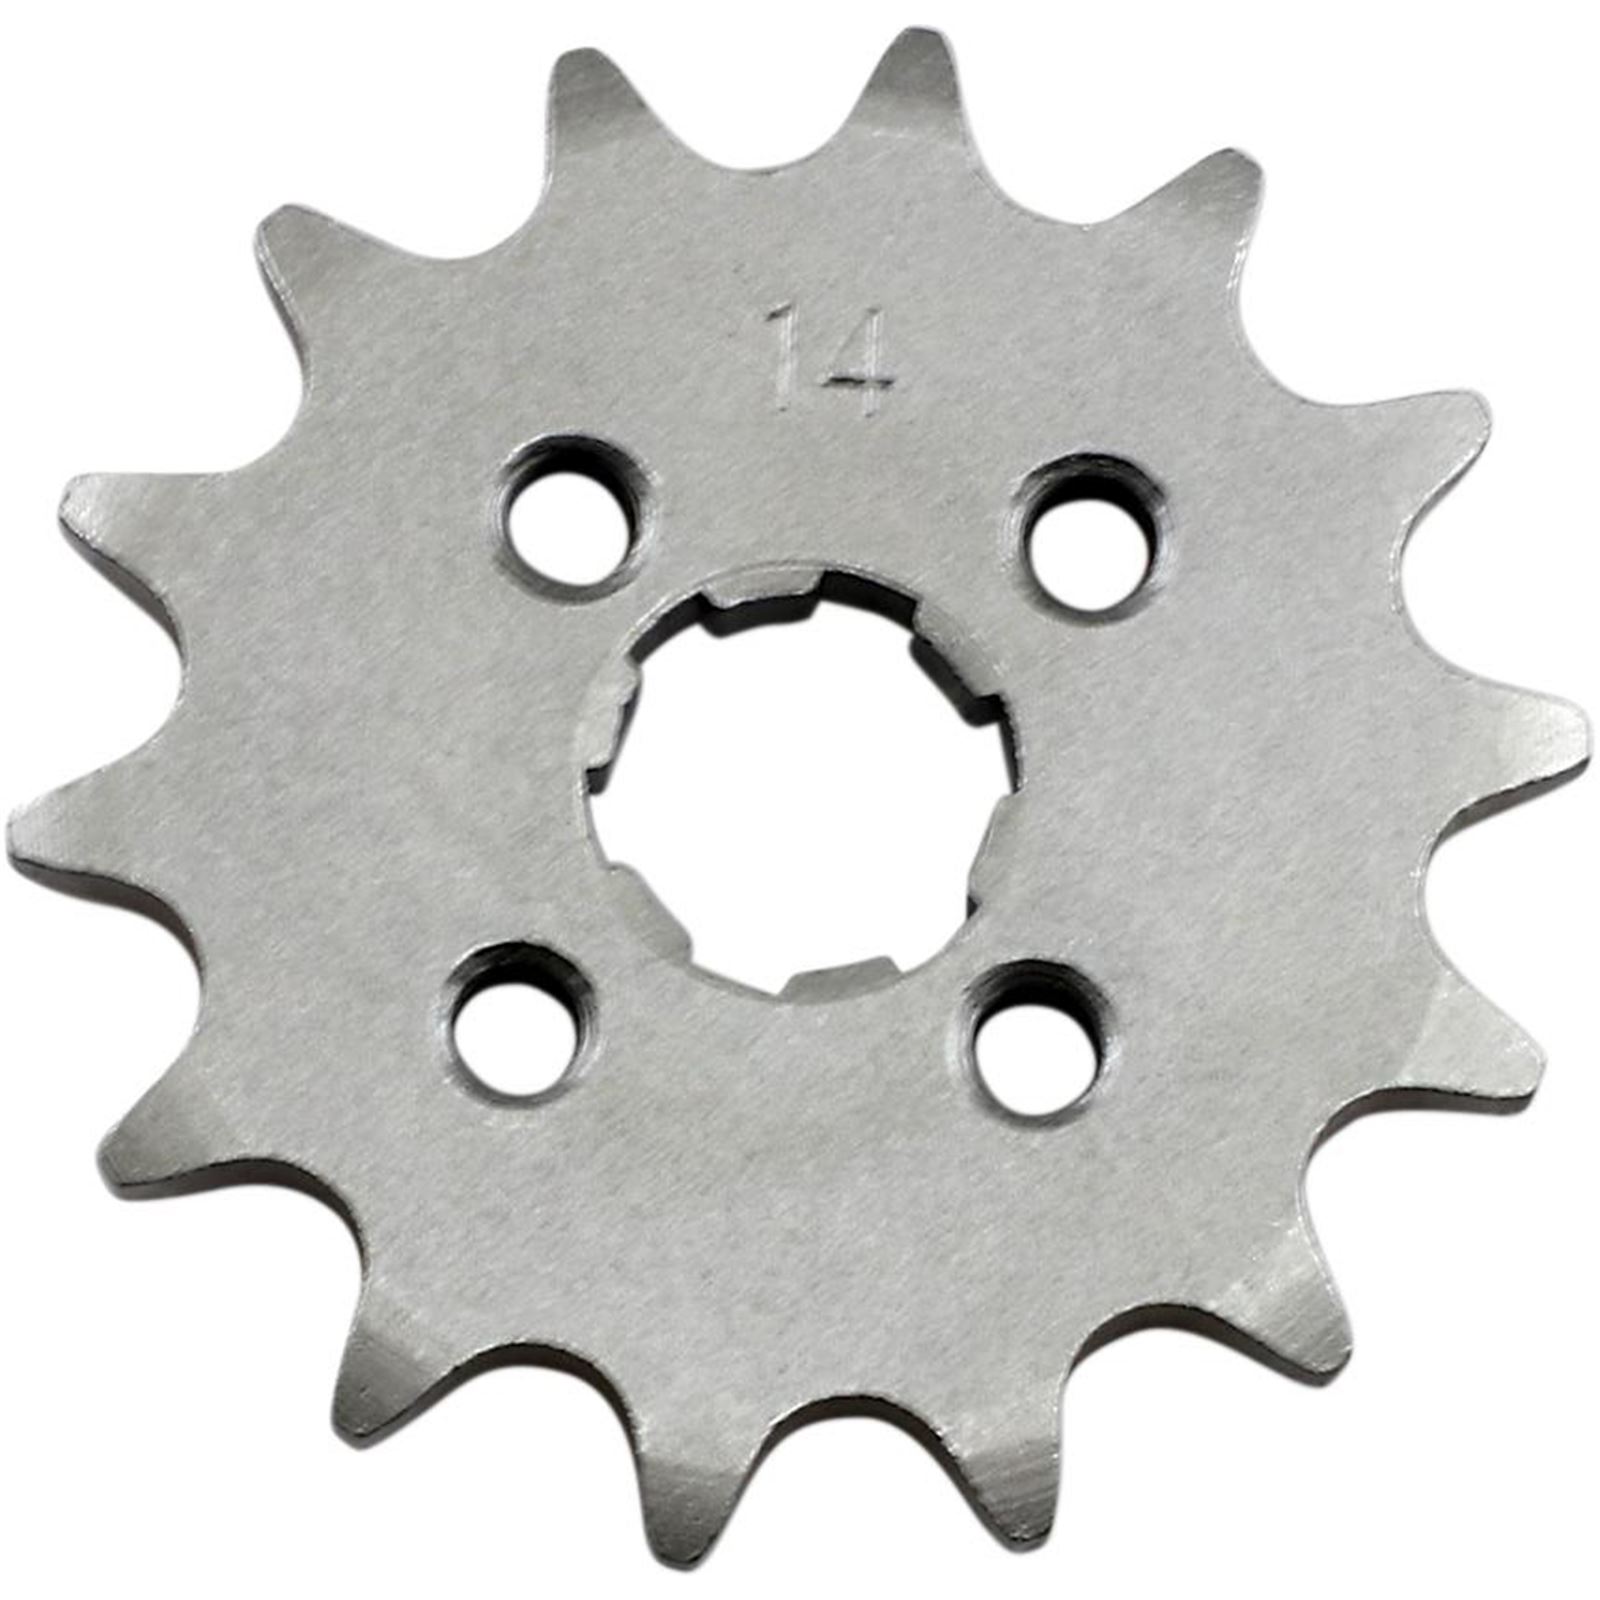 Parts Unlimited Counter Shaft Sprocket for Honda 420 - 14-Tooth